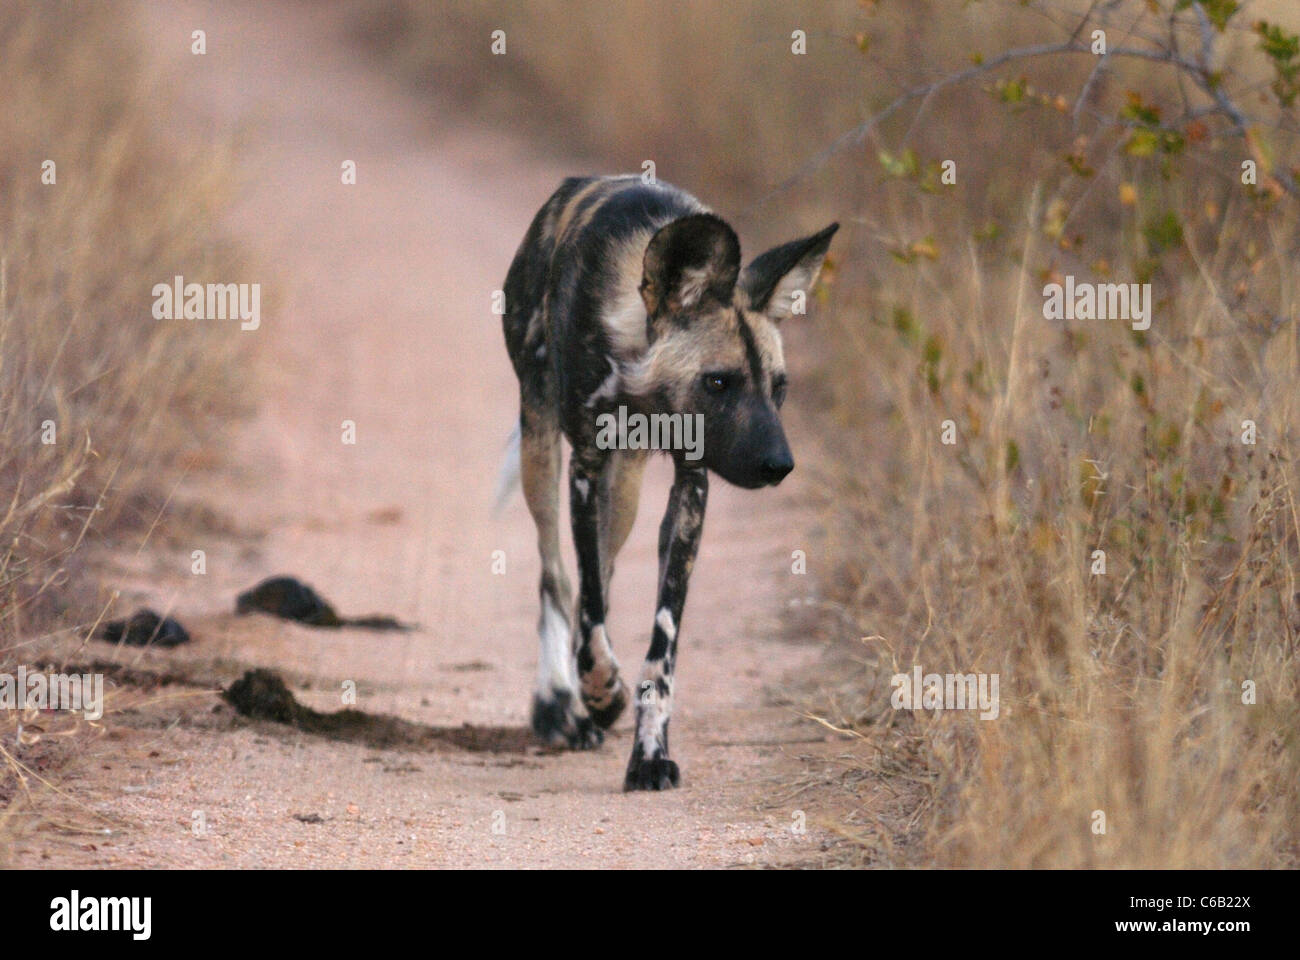 African Wild Dog (Lycaon pictus) in Kruger National Park, South Africa Stock Photo